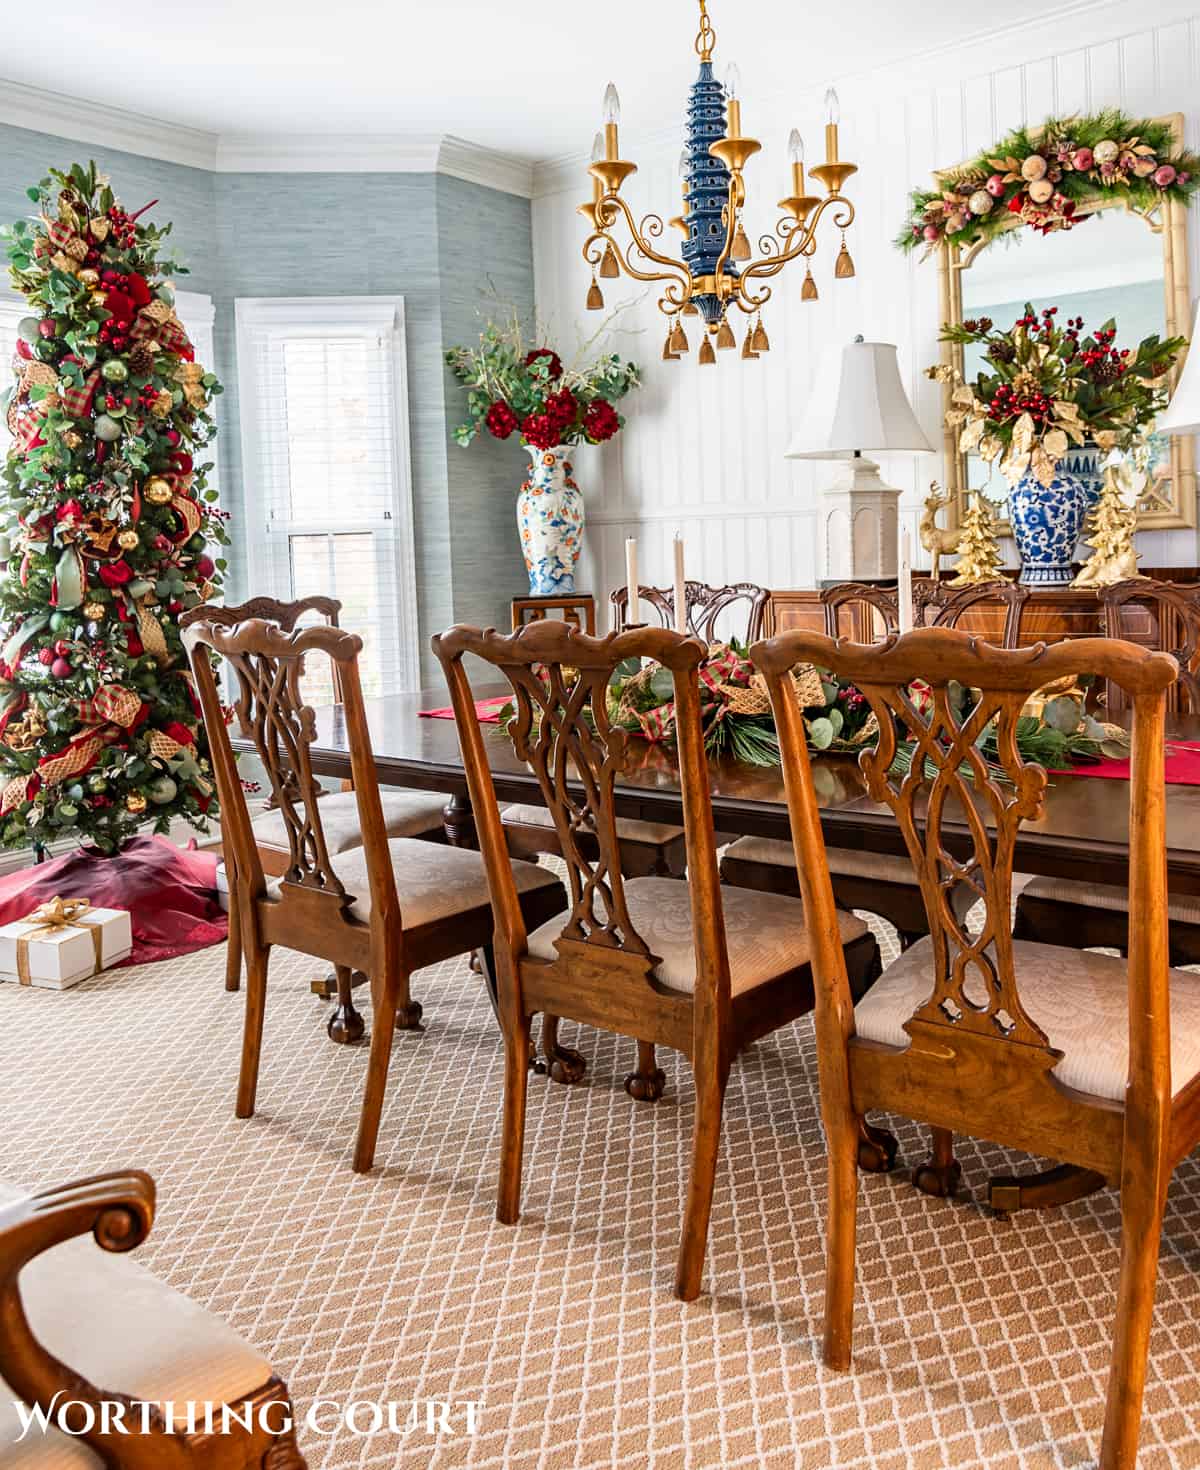 Dining room with traditional wood furniture decorated for Christmas with sage green, burgundy, and gold decorations.